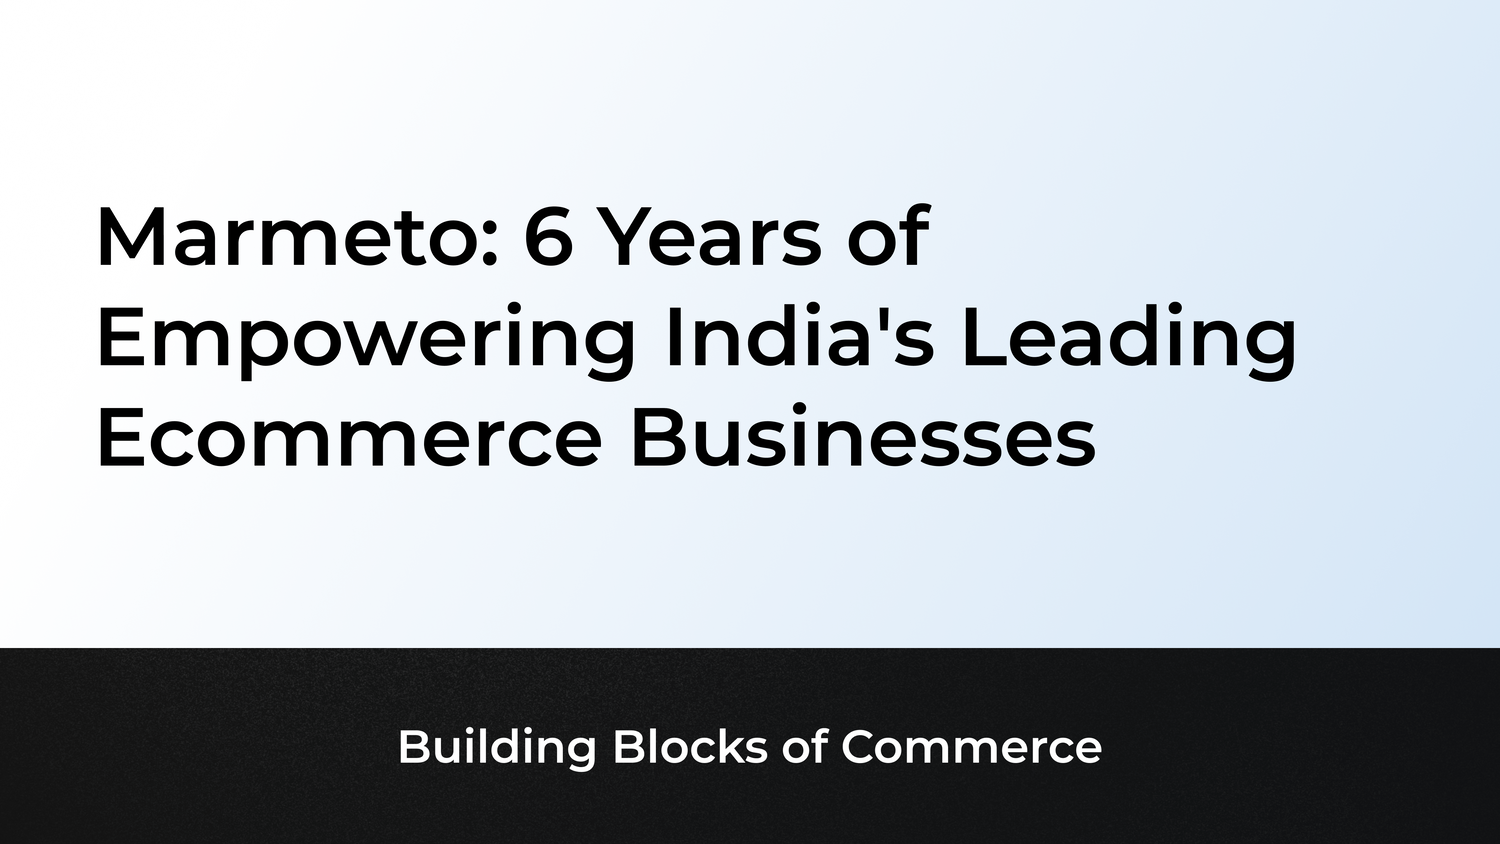 Marmeto: 6 Years of Empowering India's Leading Ecommerce Businesses